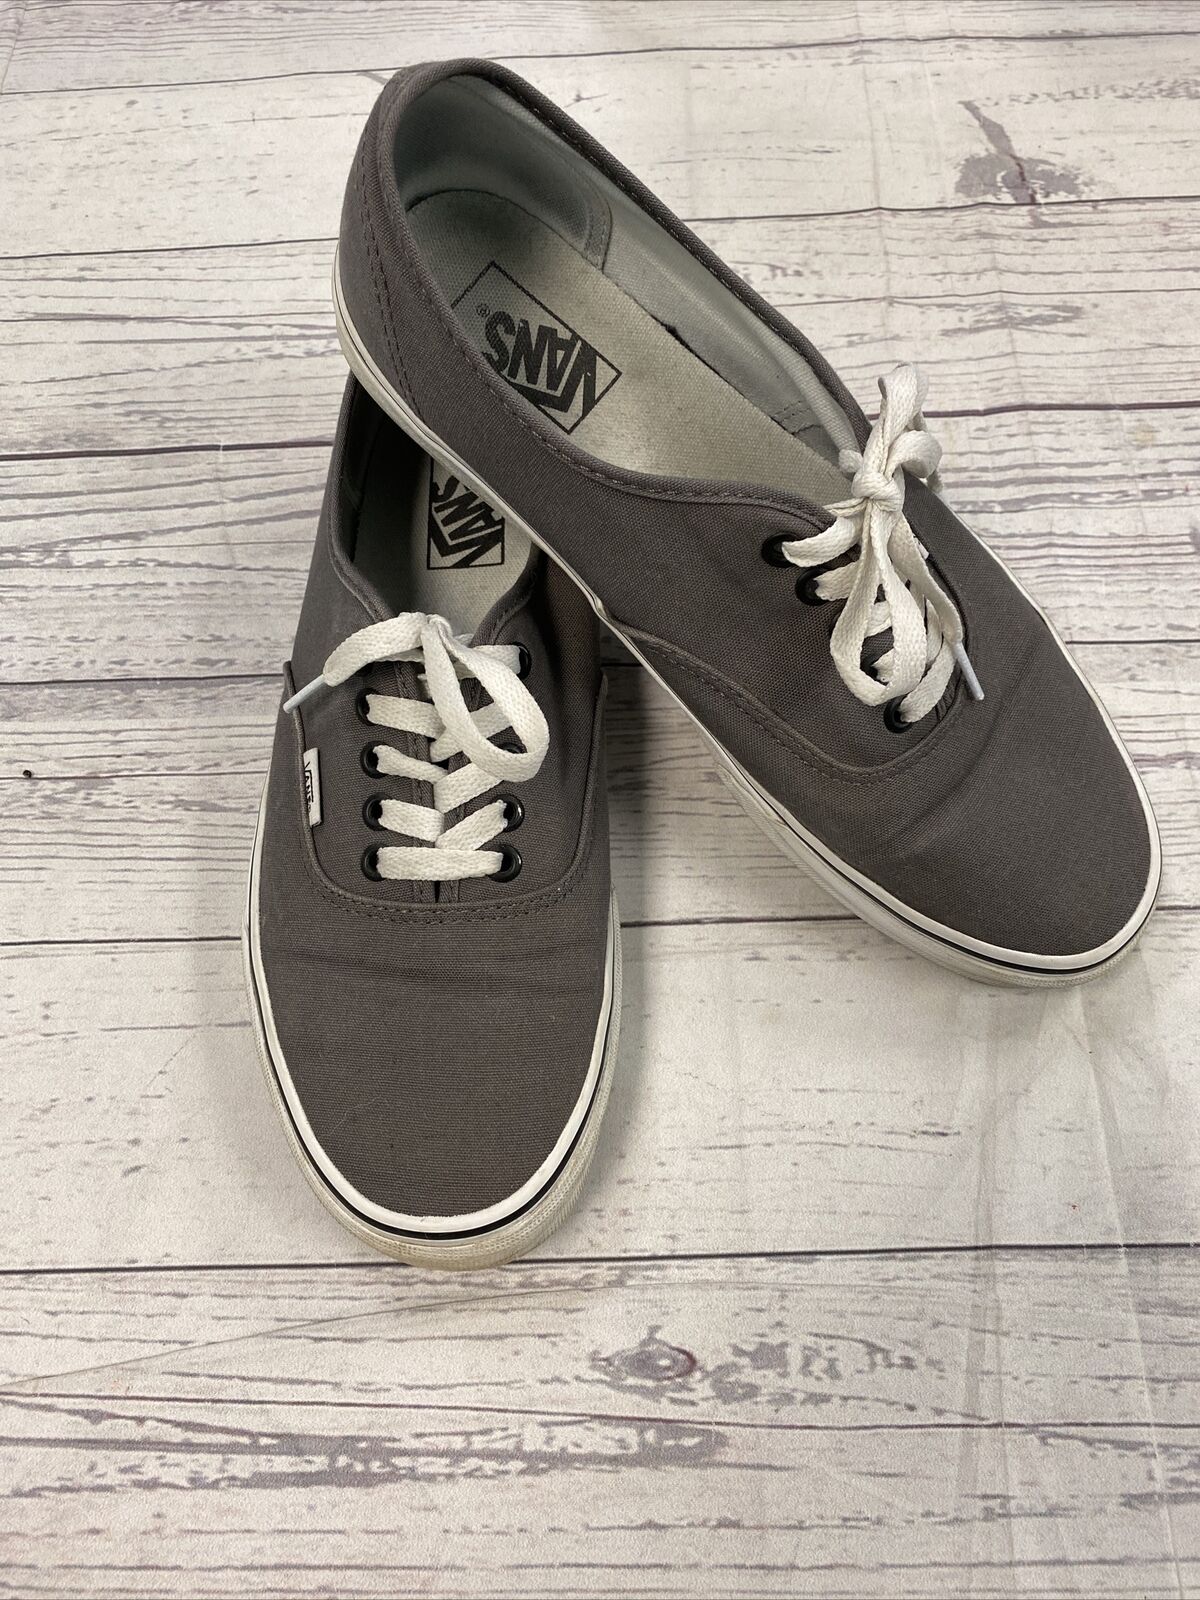 Begunstigde Teleurgesteld mannetje VANS Off The Wall Classic Low Top Canvas Skate Shoes Gray White Mens S -  beyond exchange